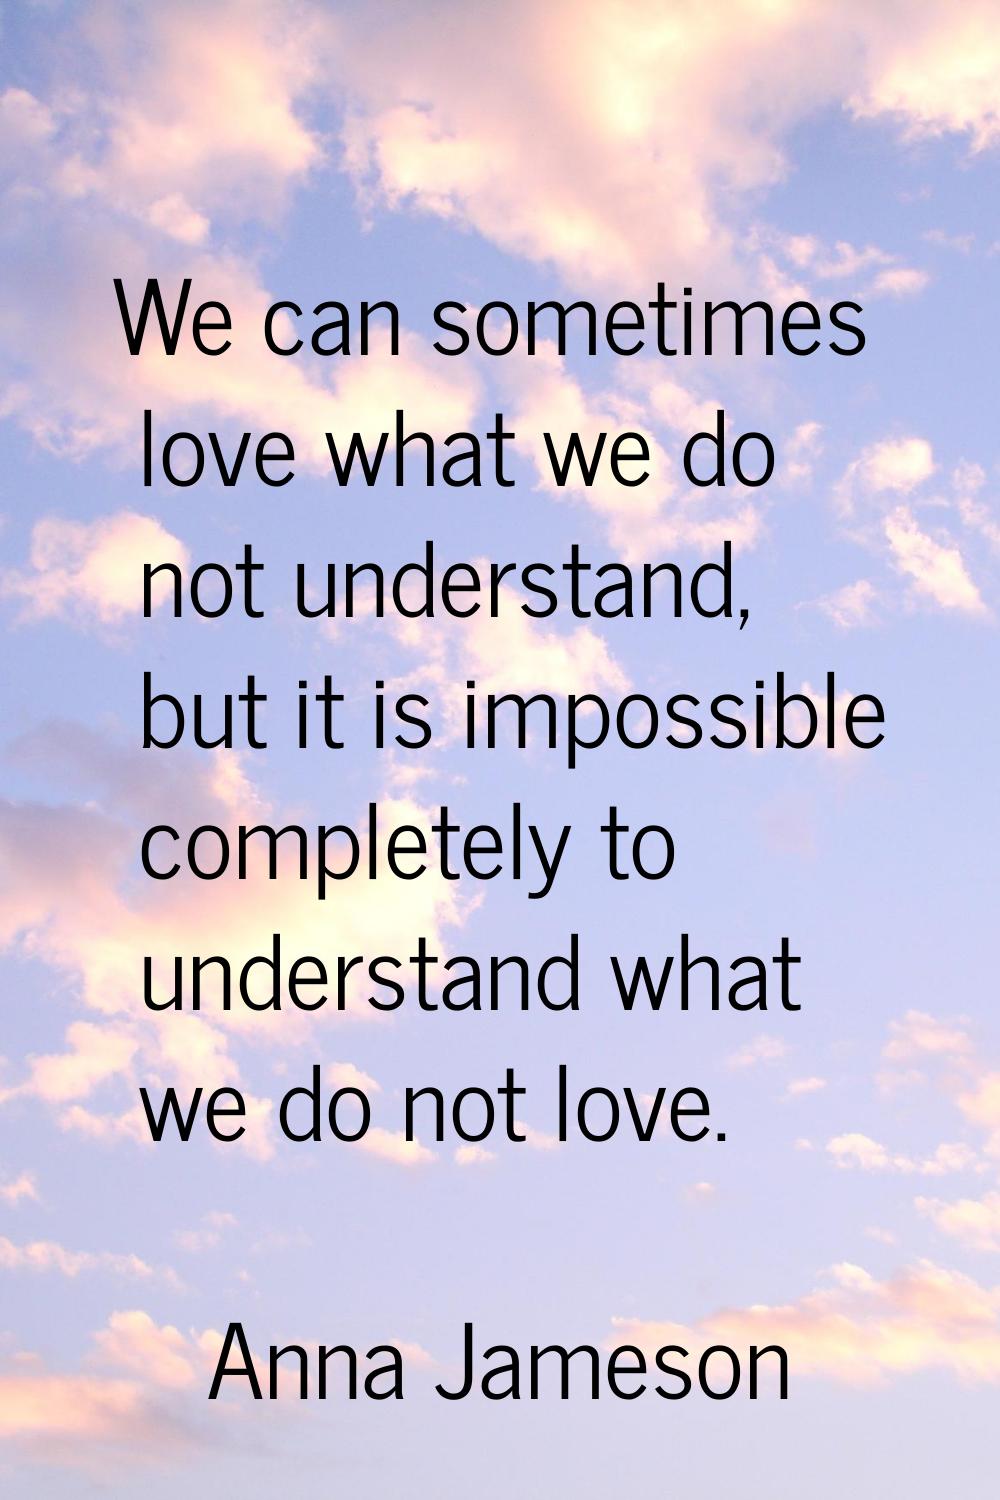 We can sometimes love what we do not understand, but it is impossible completely to understand what